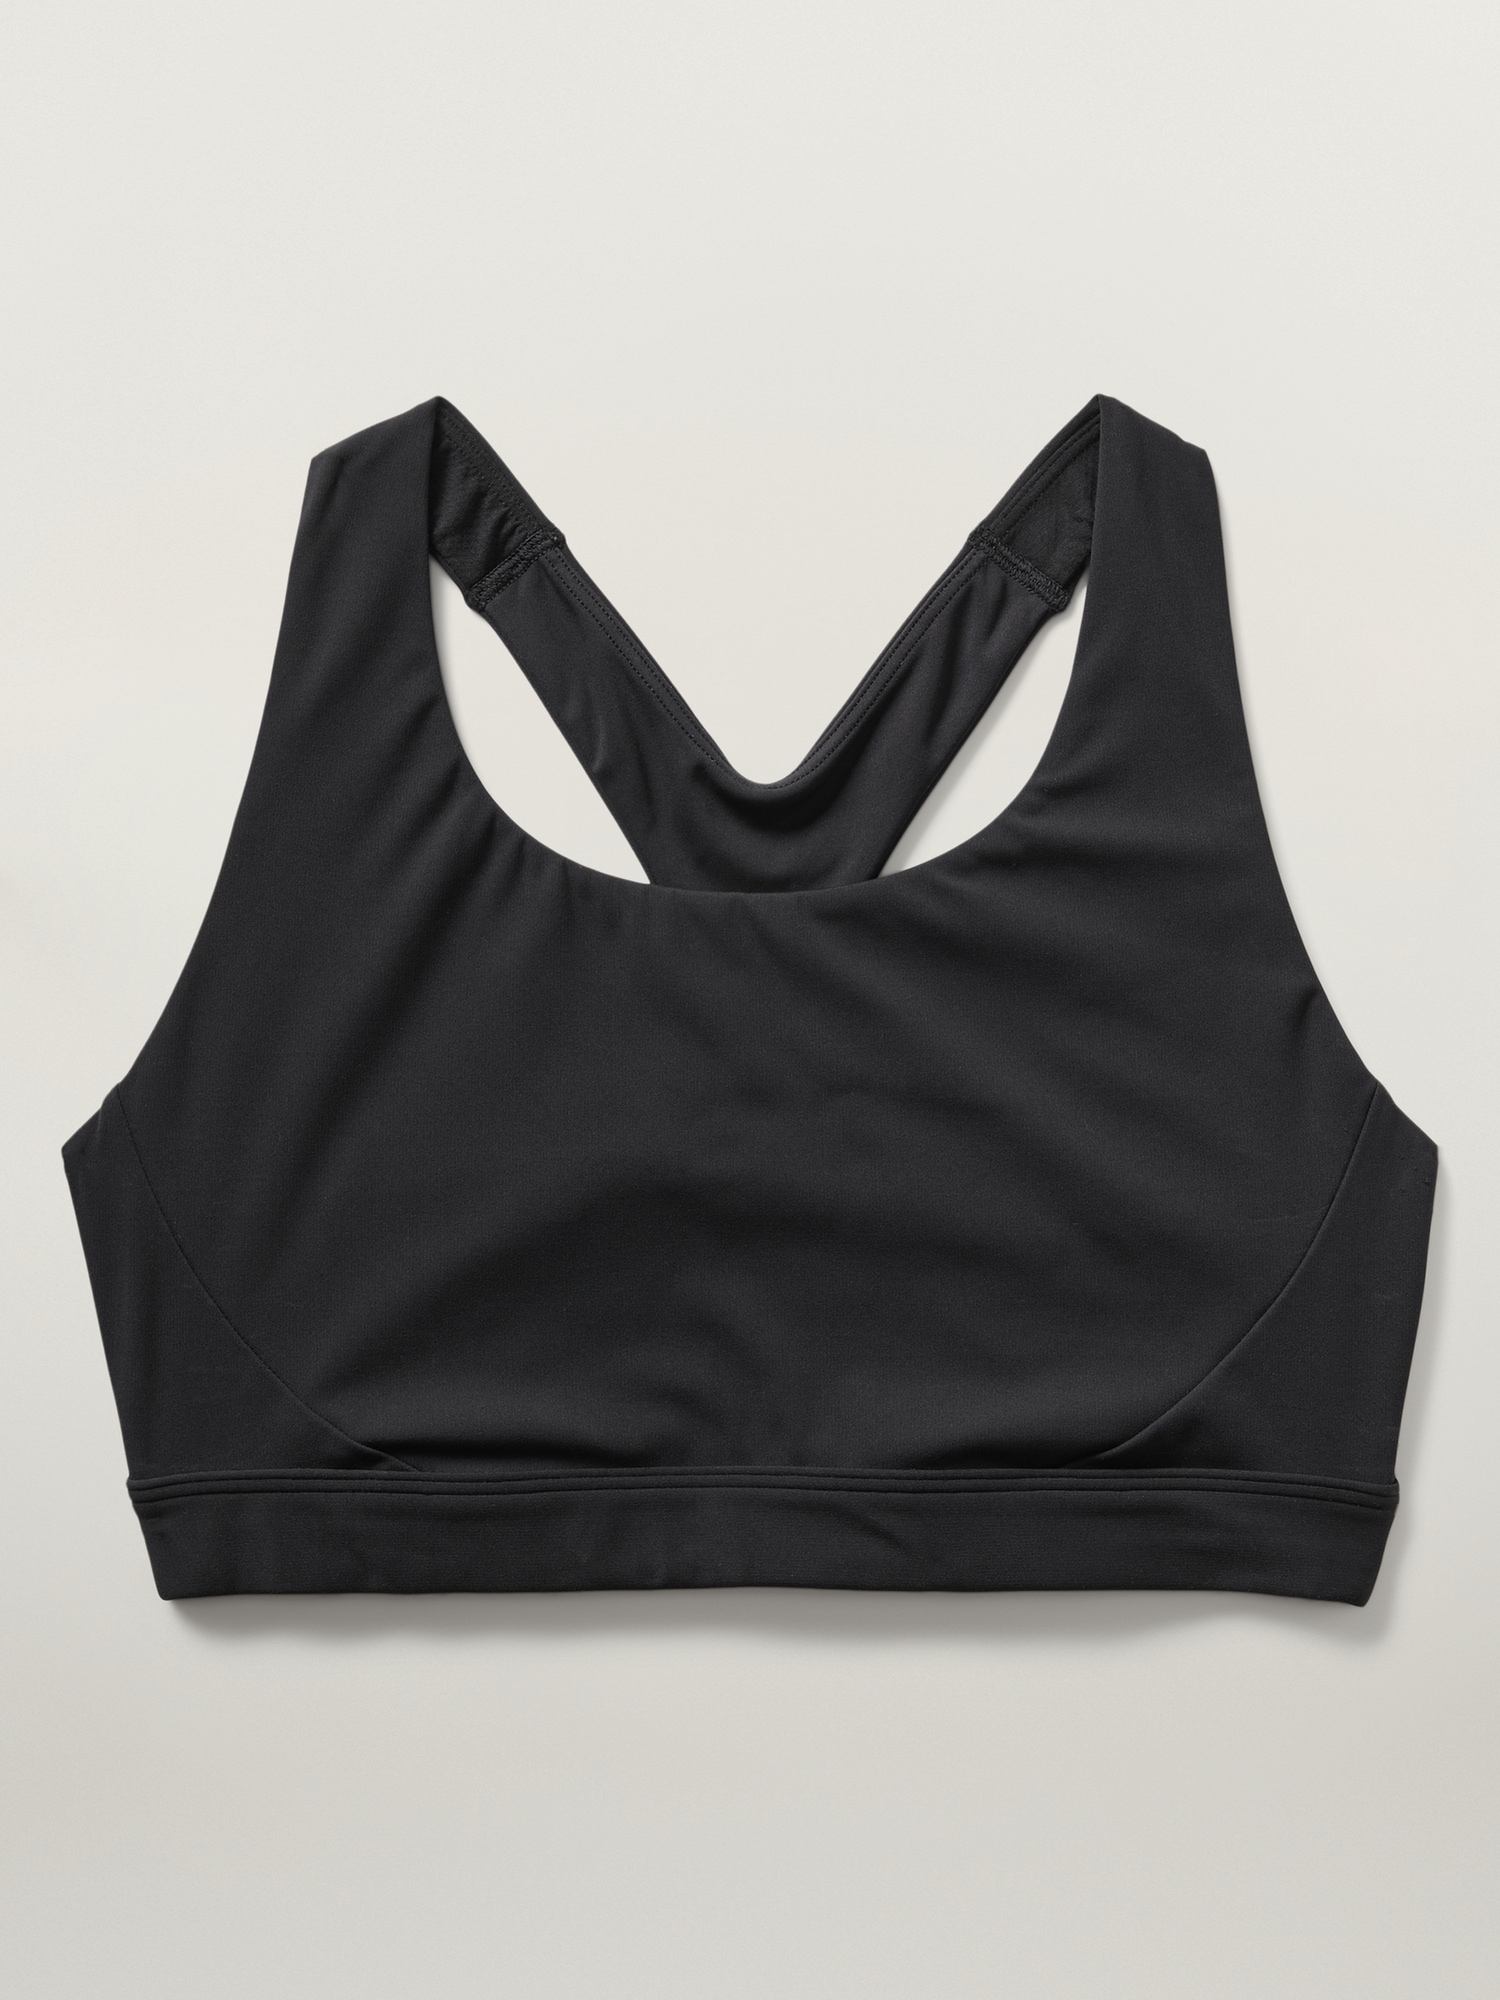 Athleta Ultimate Textured Sports Bra Black and Gray Size Small